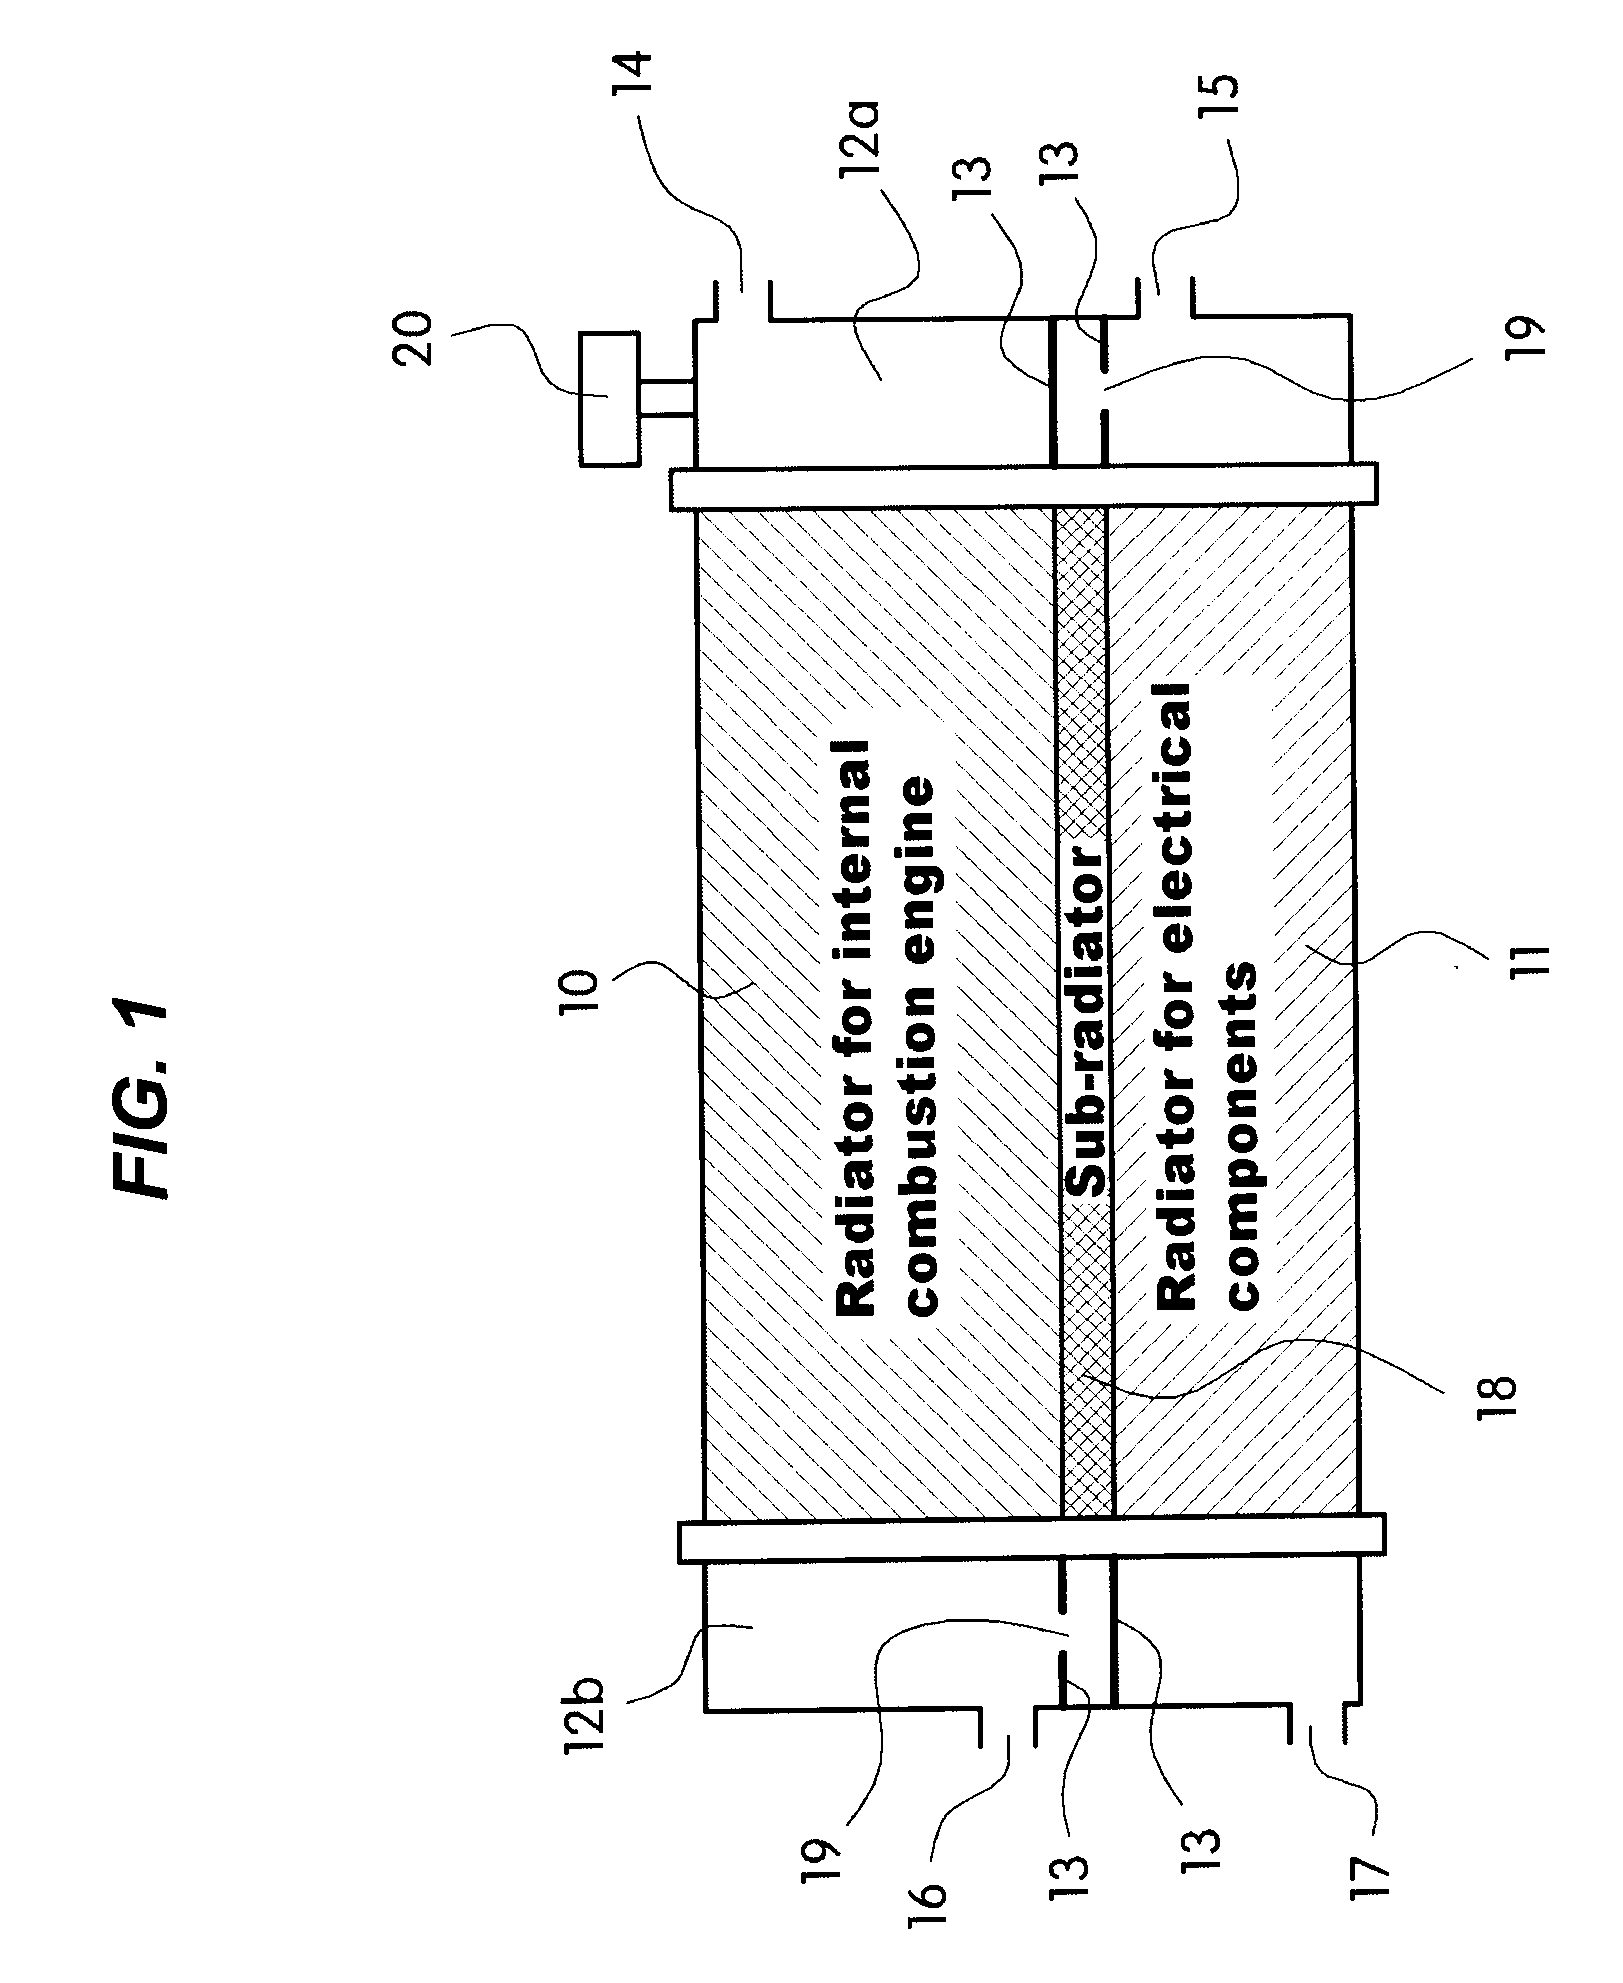 Integrated hybrid heat exchanger with multi-sectional structure